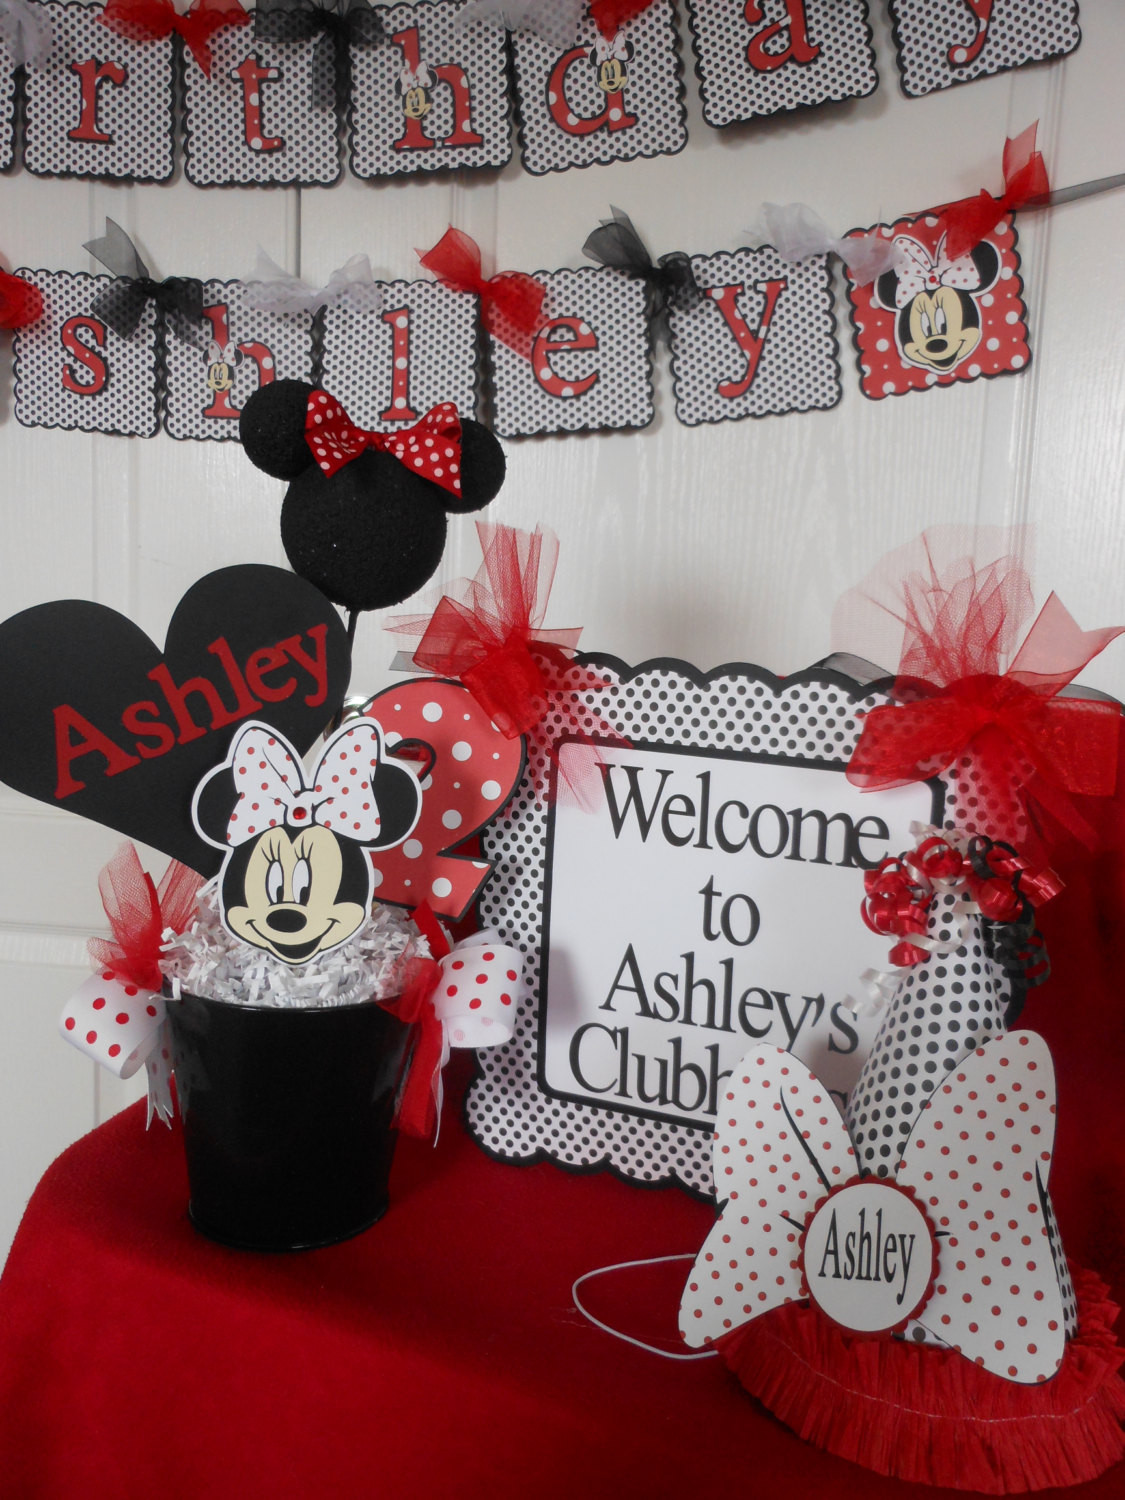 Red Minnie Mouse Birthday Decorations
 Minnie Mouse Red Polka Dot Ultimate Birthday Party Package